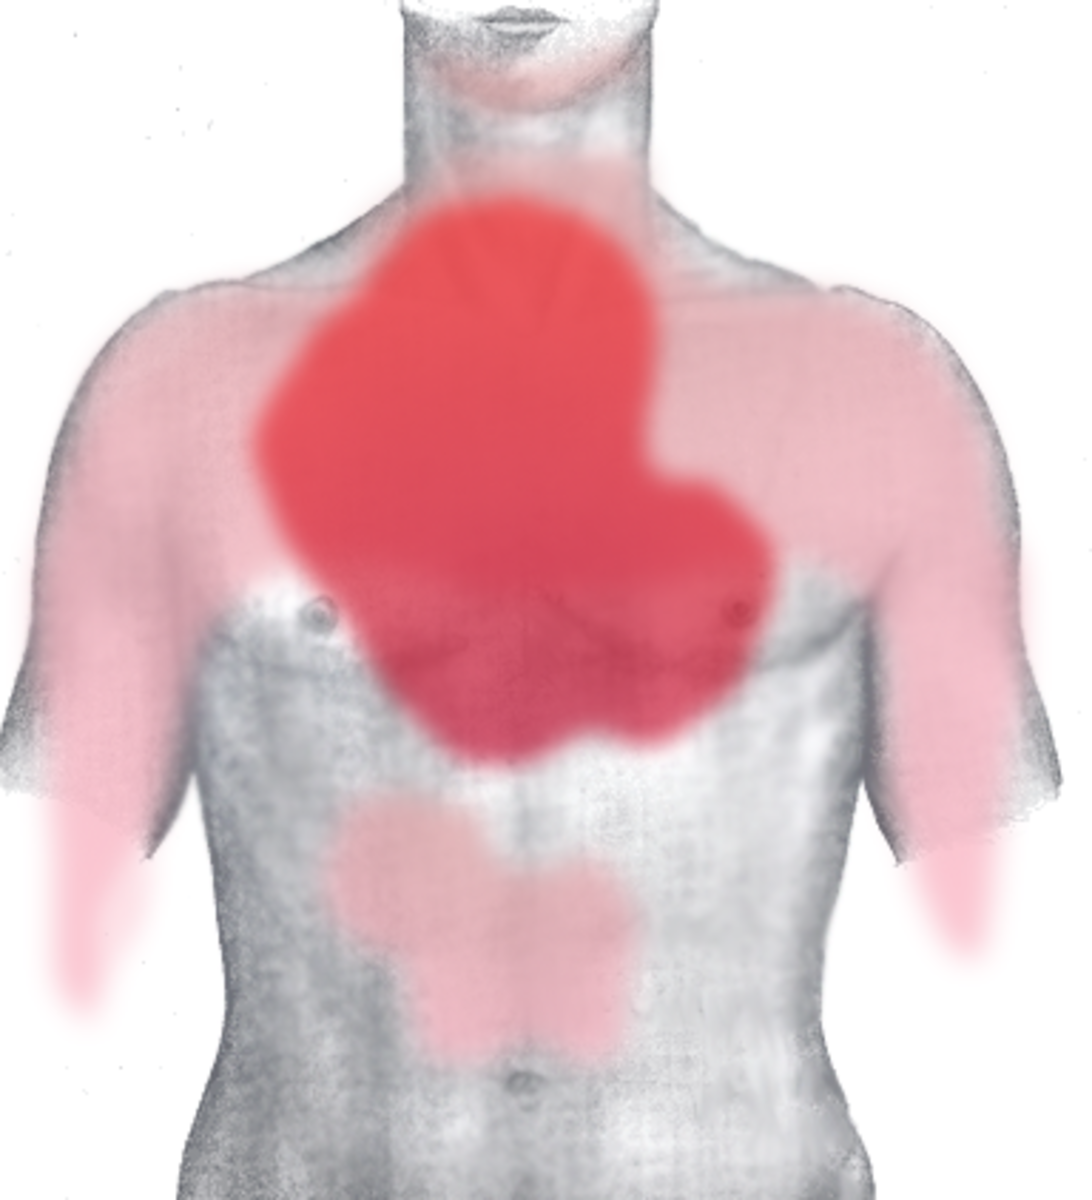 Rough diagram of pain zones in myocardial infarction; dark red: most typical area, light red: other possible areas; view of the chest. 